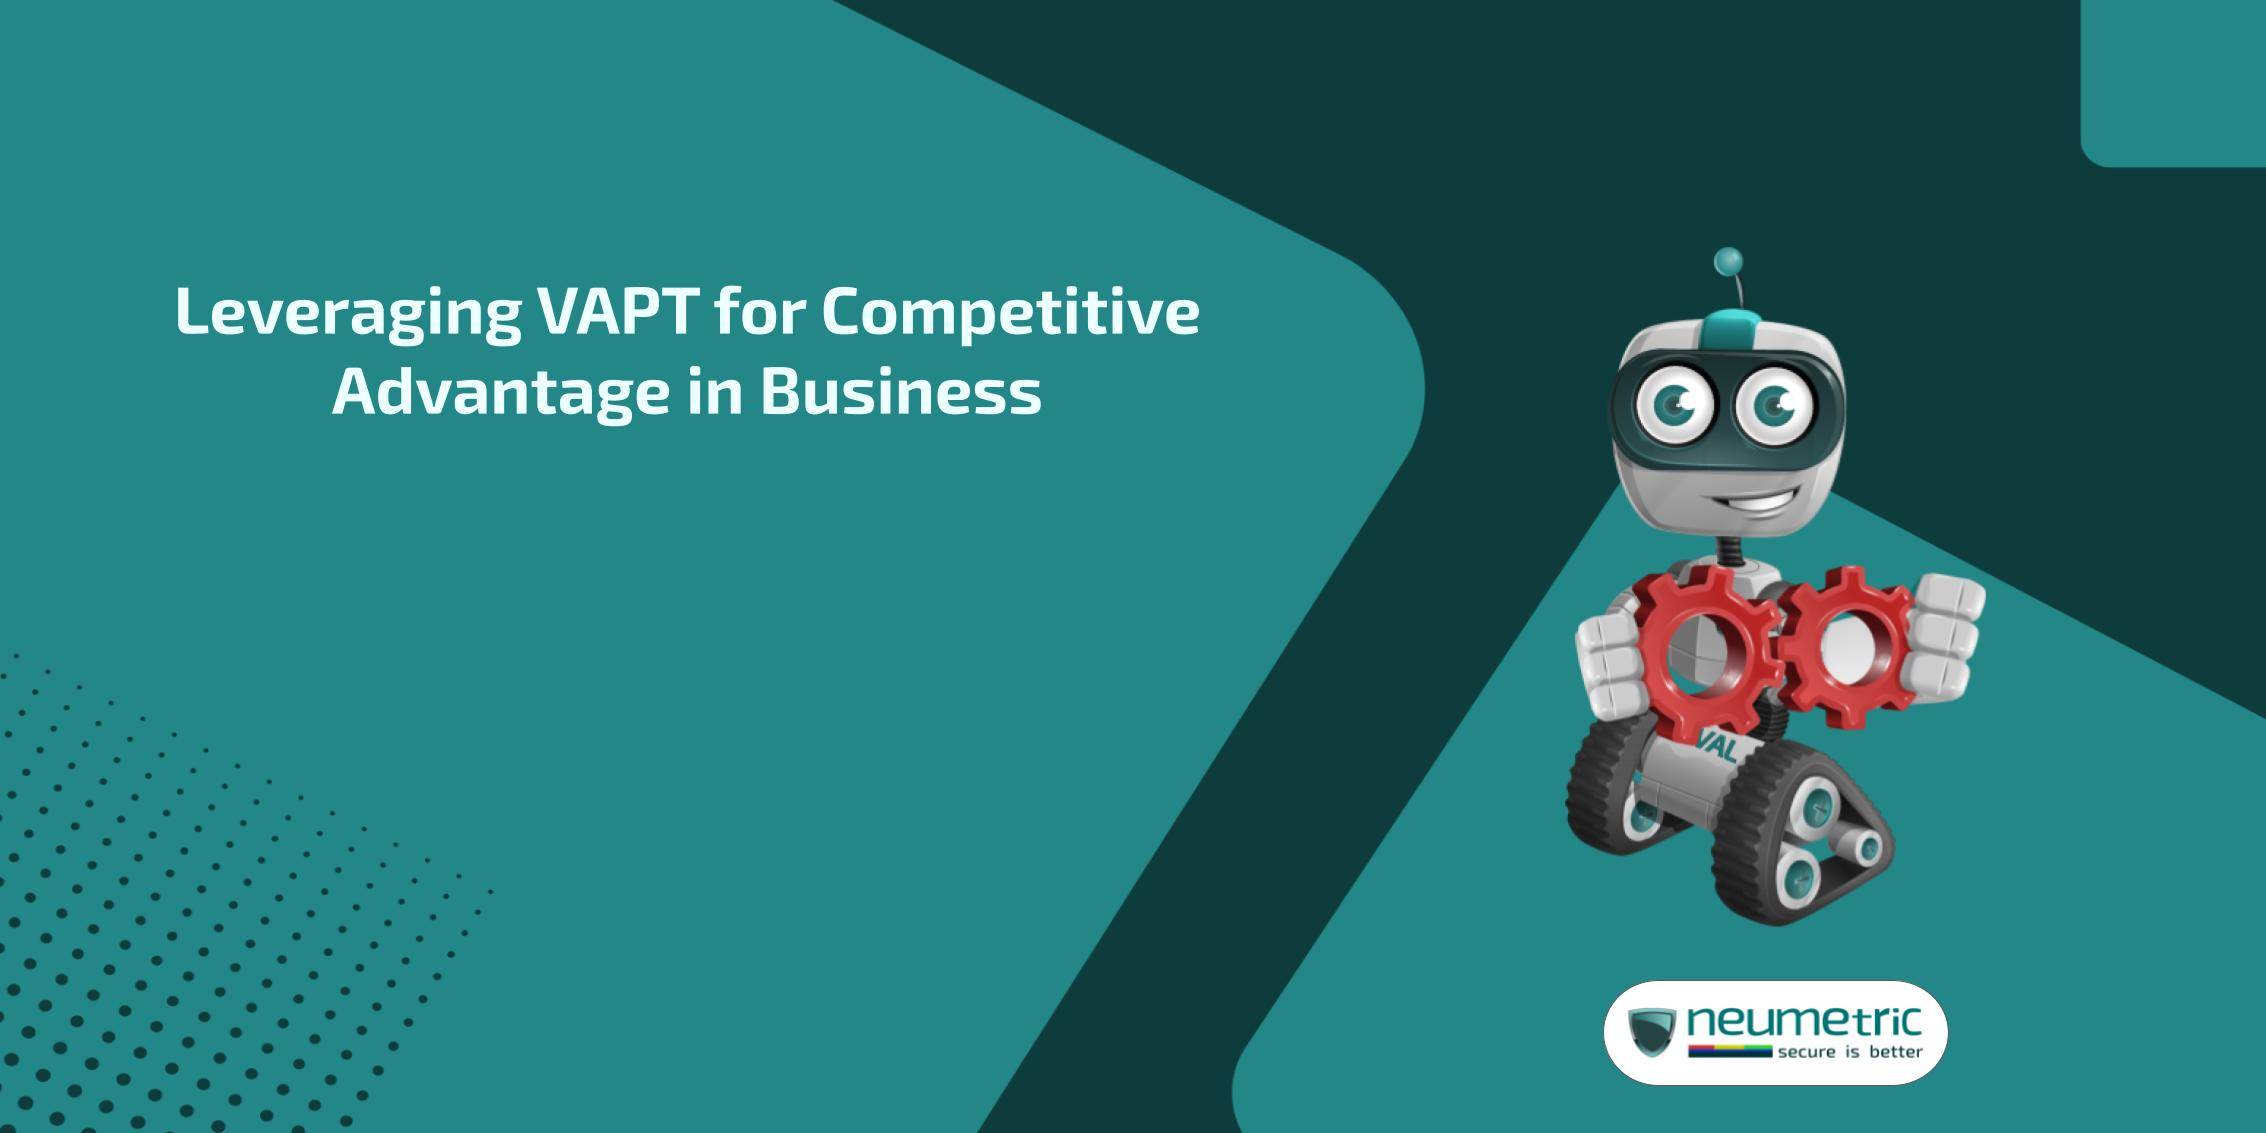 Leveraging VAPT for competitive advantage in business